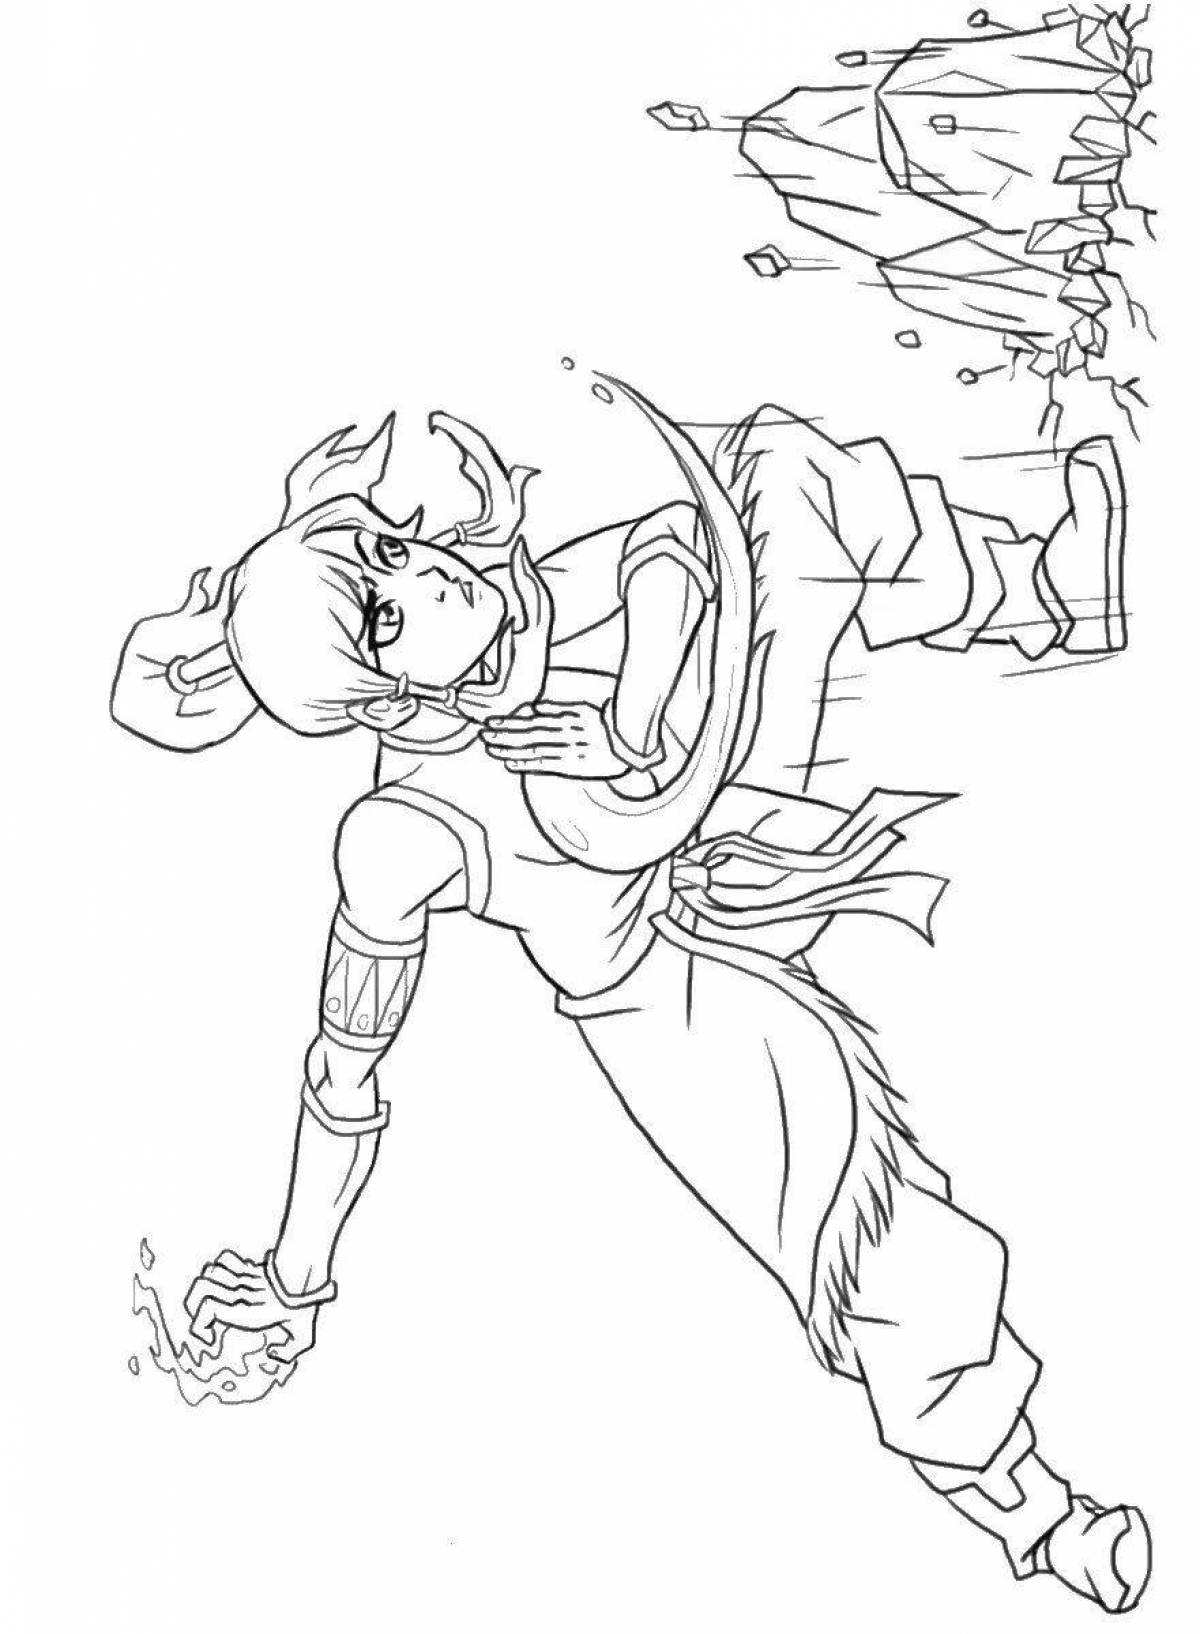 Korra funny avatar coloring page